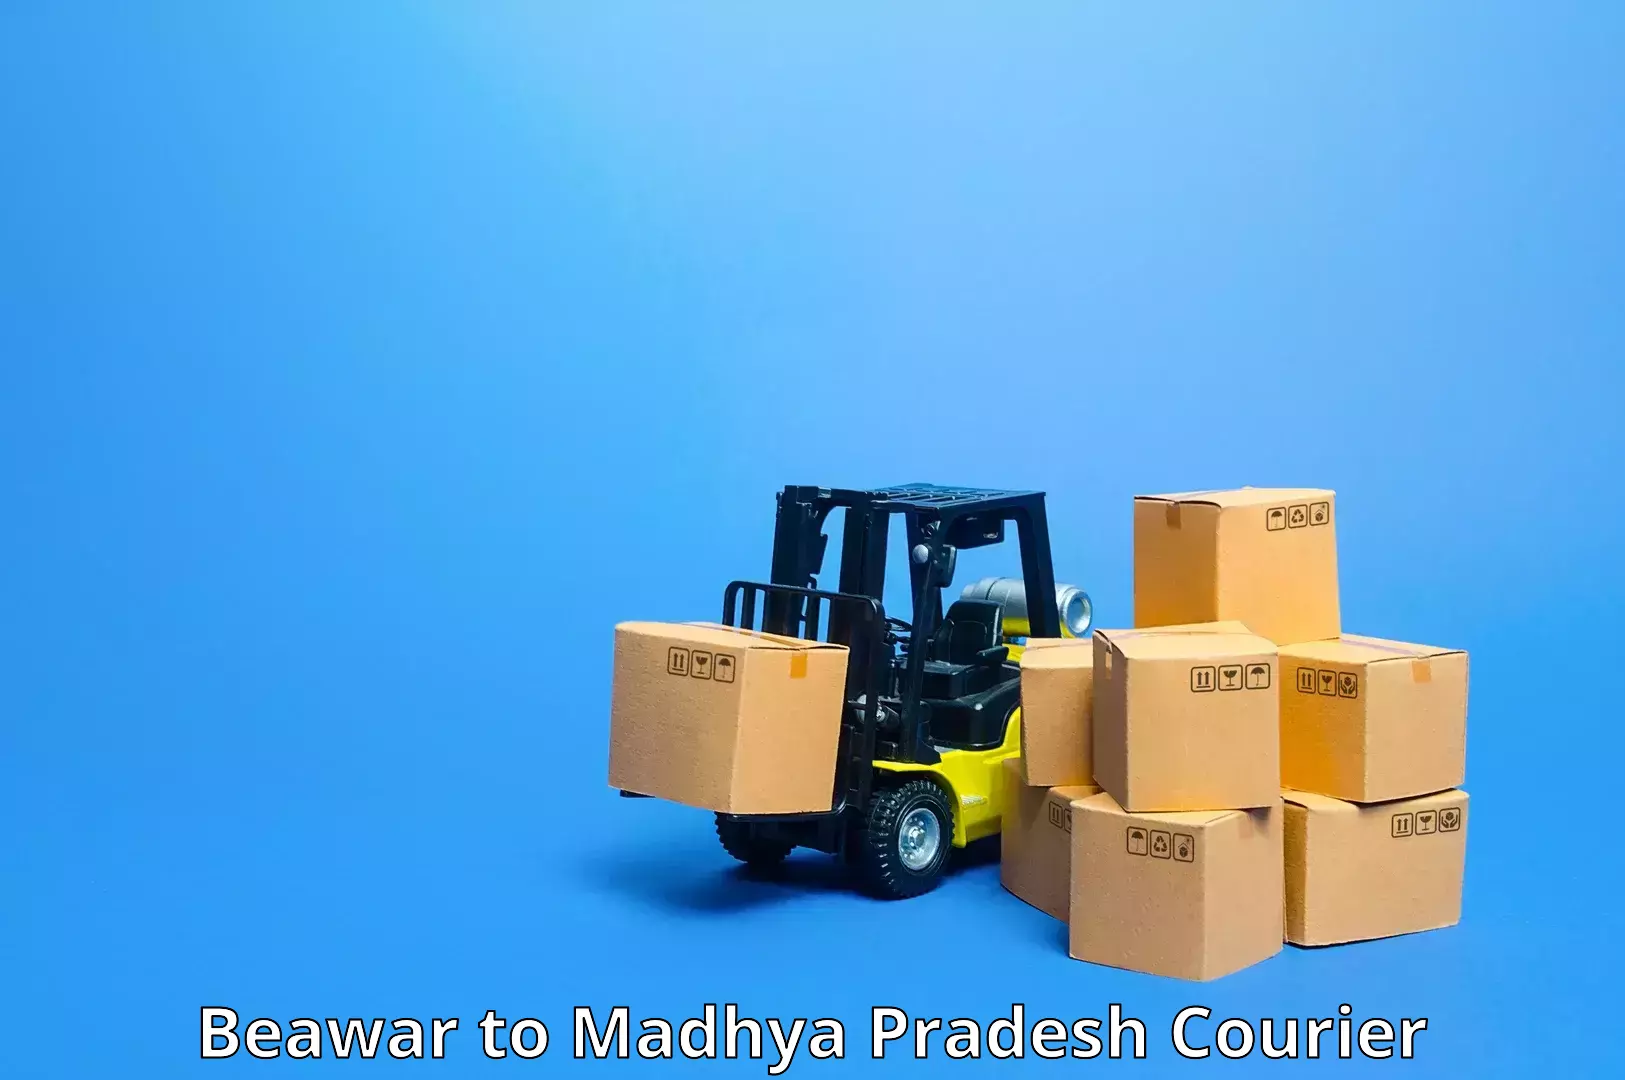 Courier service partnerships Beawar to Gwalior